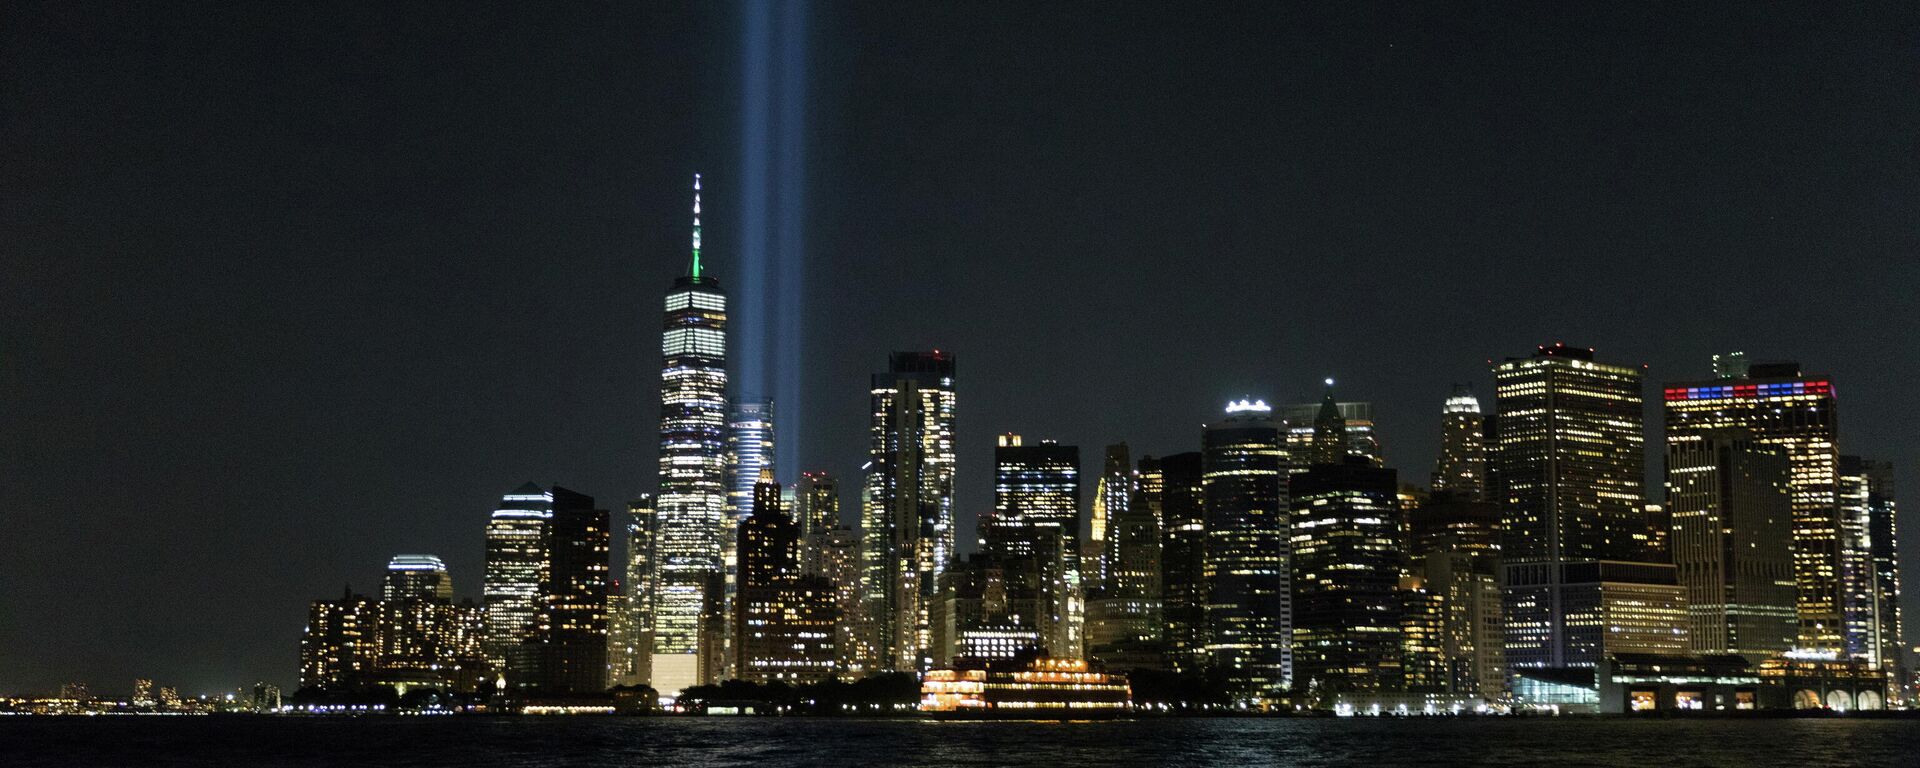 The tribute in lights is tested before the 20th anniversary of the September 11 attacks in New York City, New York, U.S., September 7, 2021 - Sputnik International, 1920, 10.09.2021